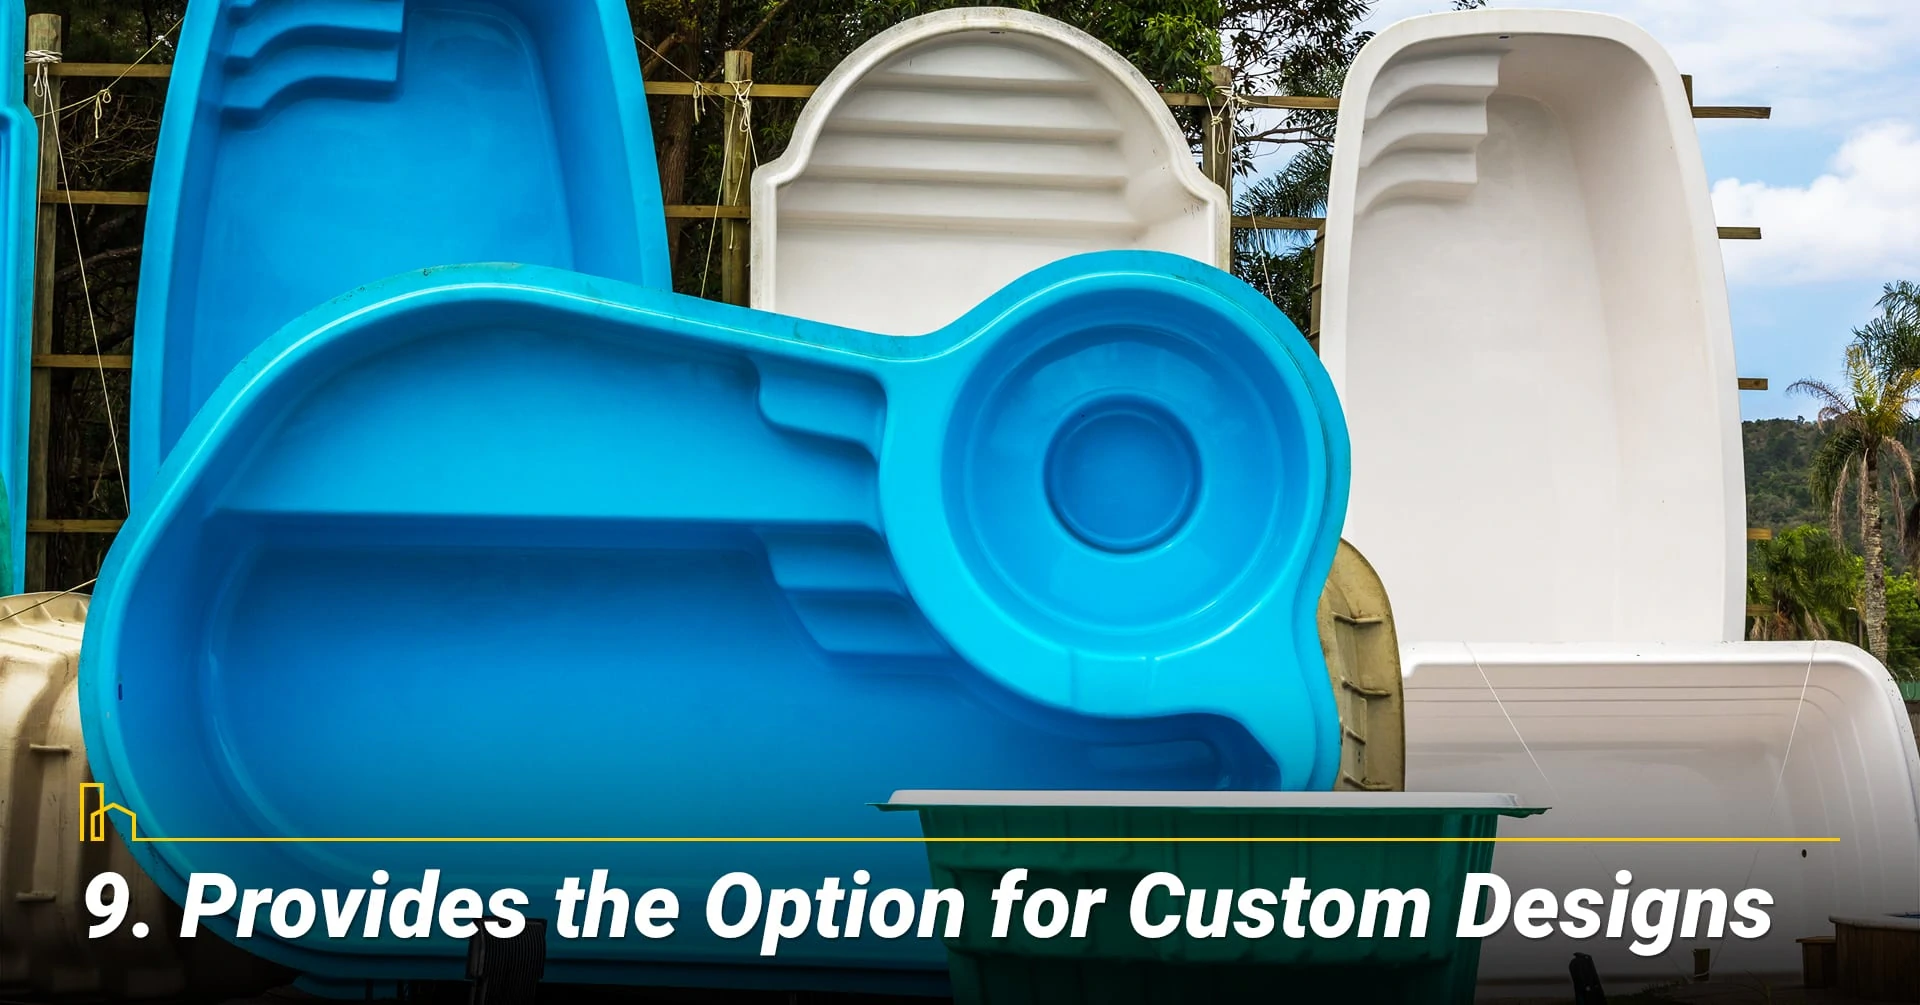 Provides the Option for Custom Designs, there are many options